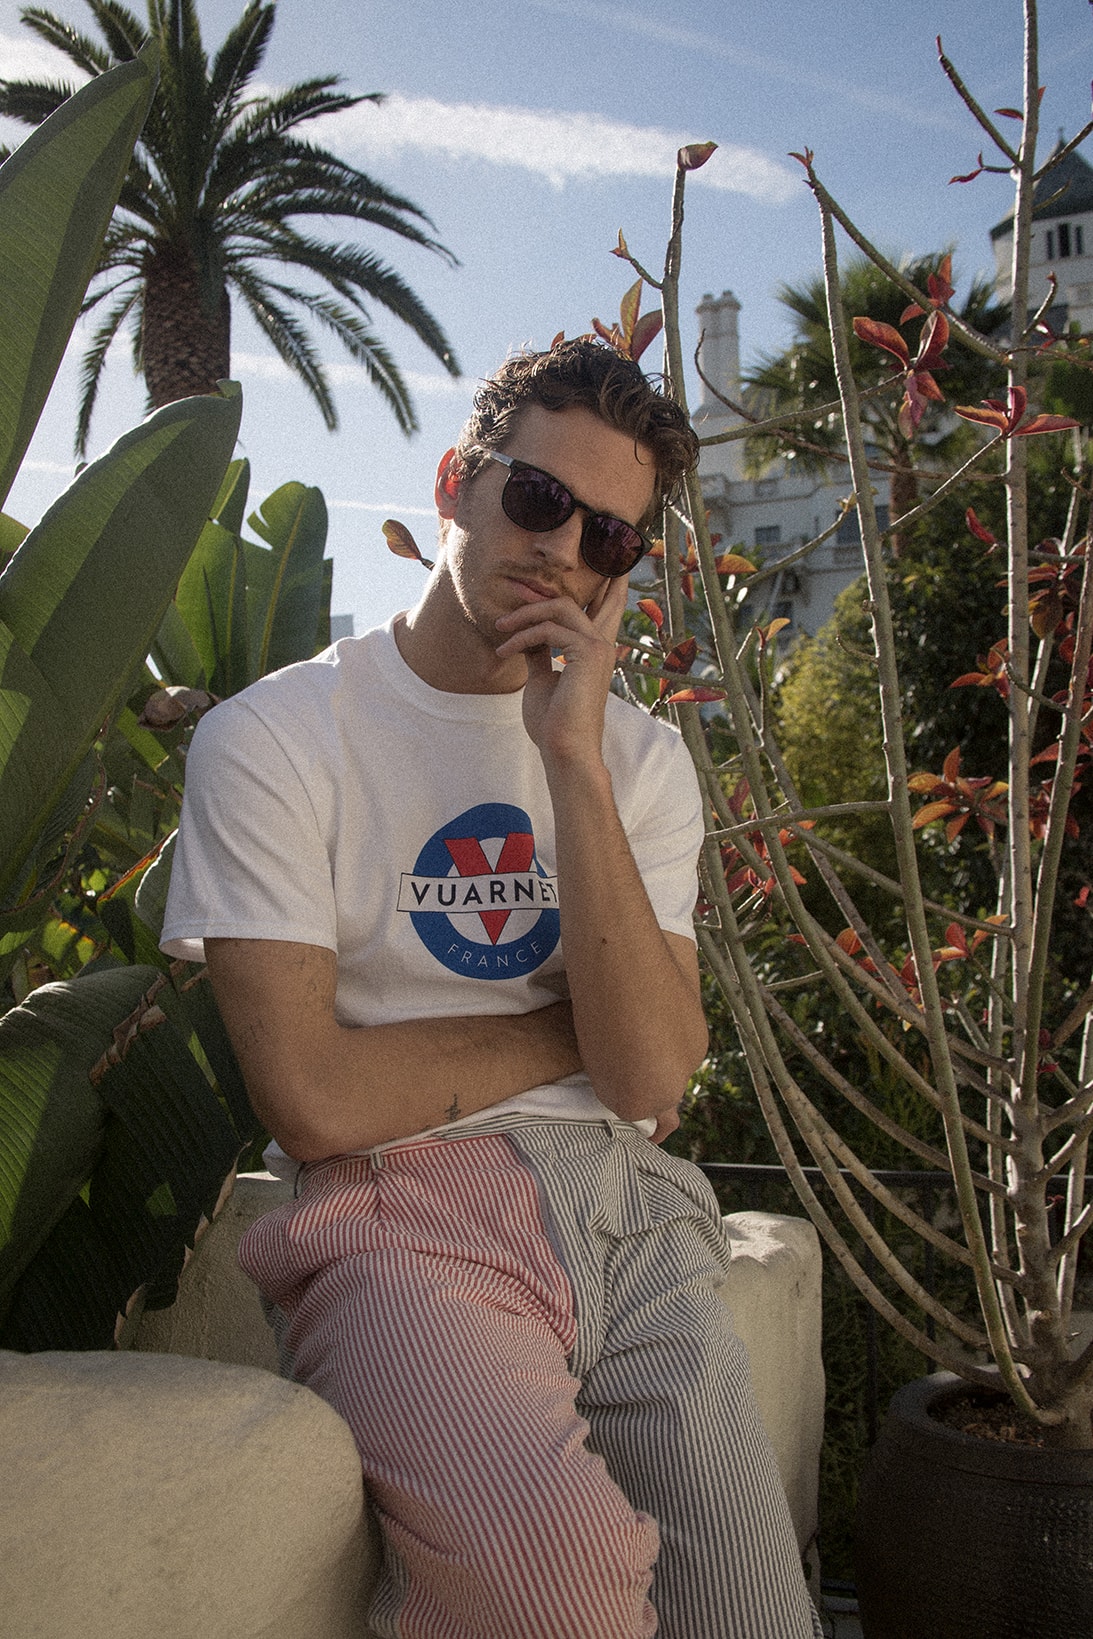 NOAH Vuarnet Spring Summer 2018 Collaboration collection chateau marmont release date info drop